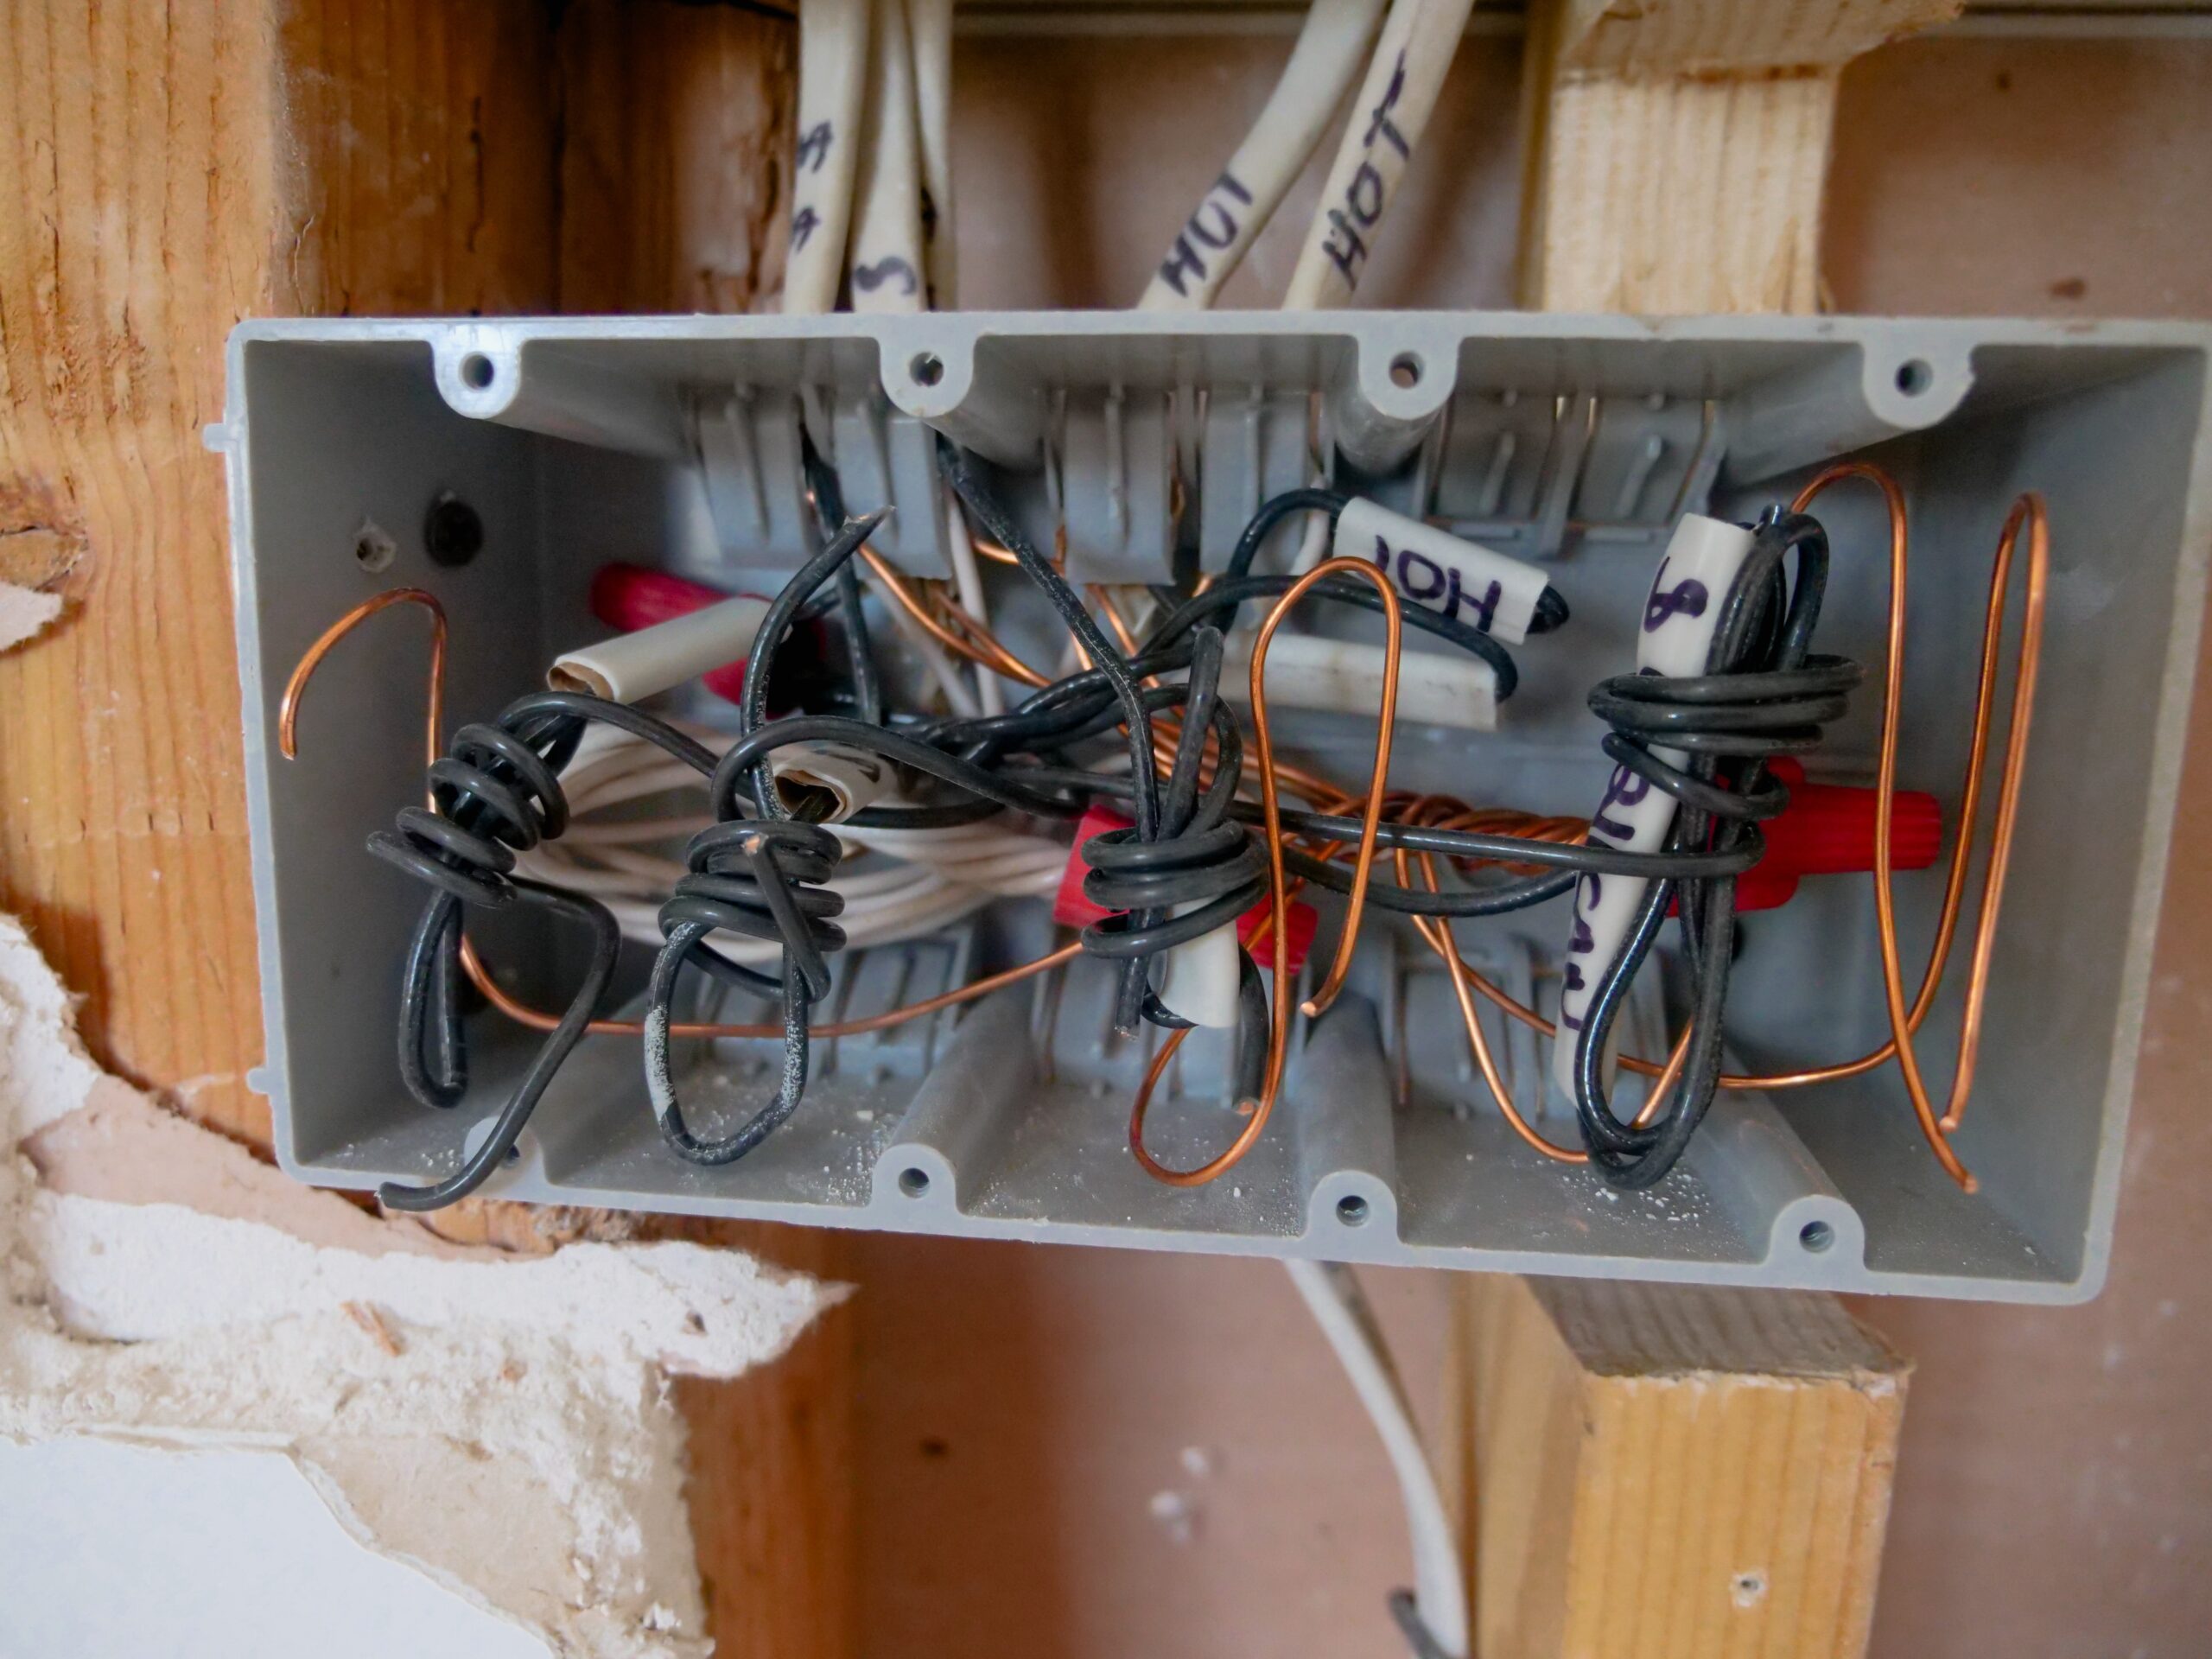 5 Common Home Electrical Problems to Look Out For